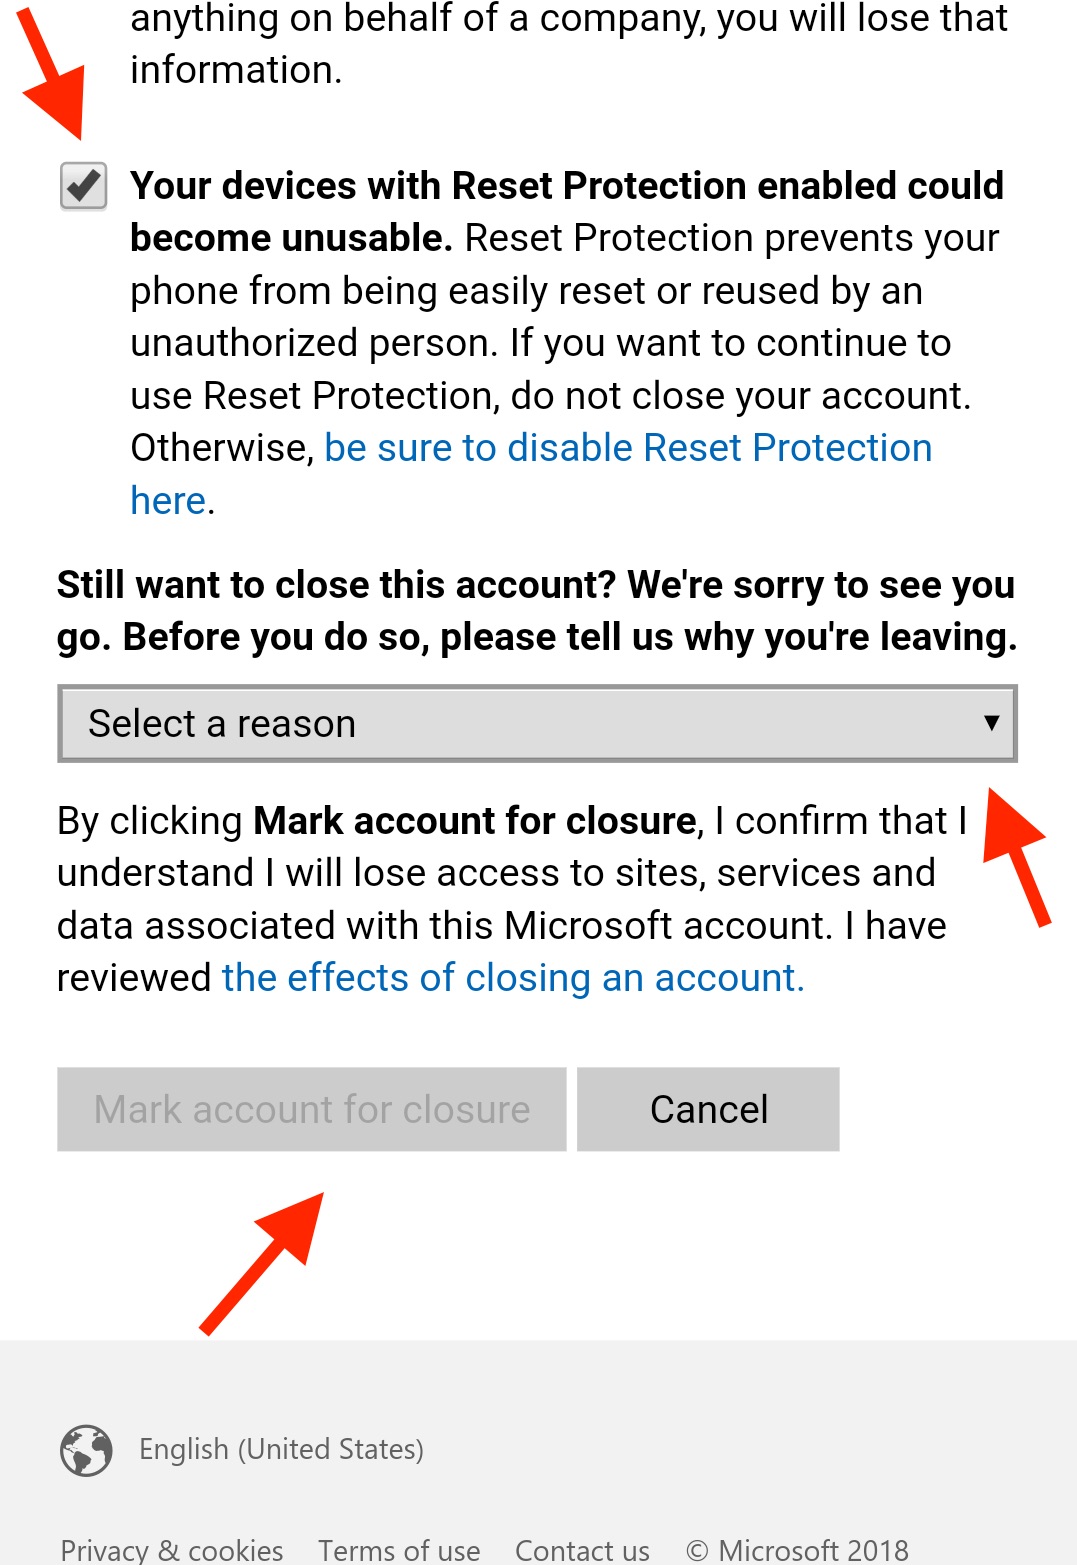 how to delete skype account from drop down list